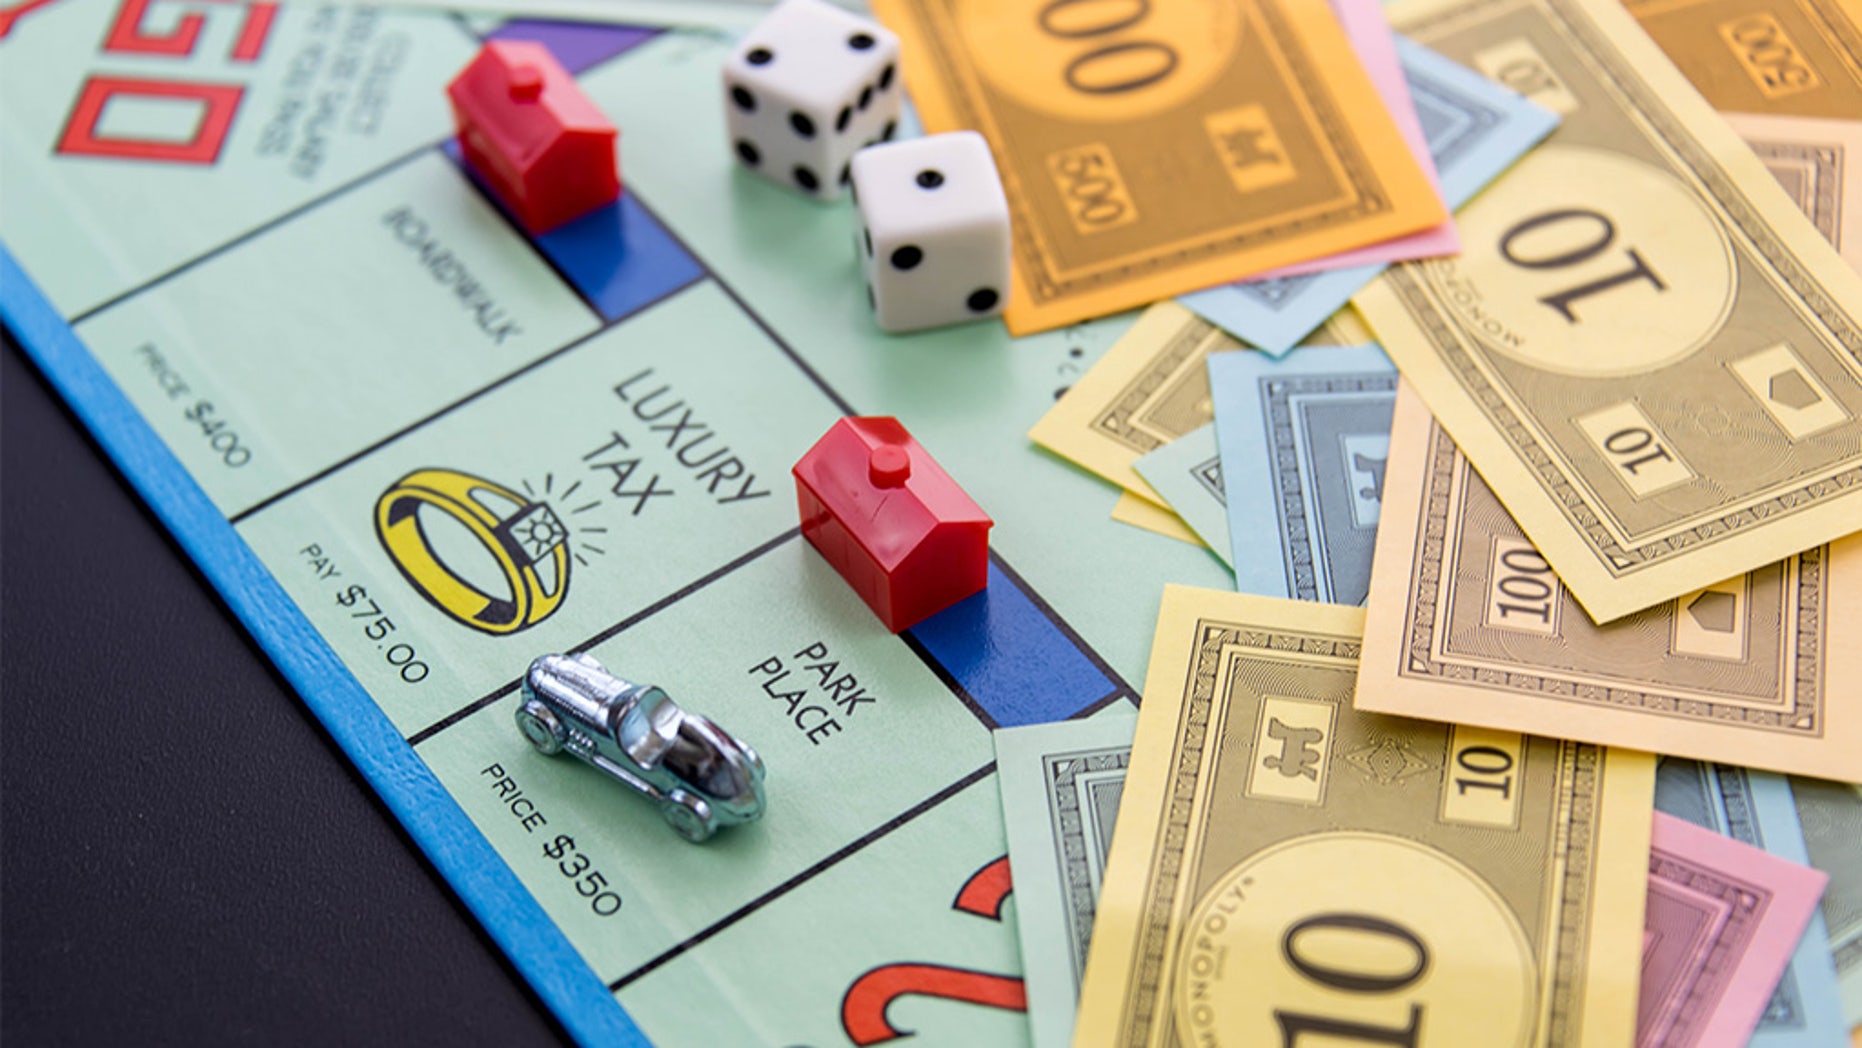 A family game night in Kansas seemingly went wrong when a violent argument broke out during a game of Monopoly, police said.